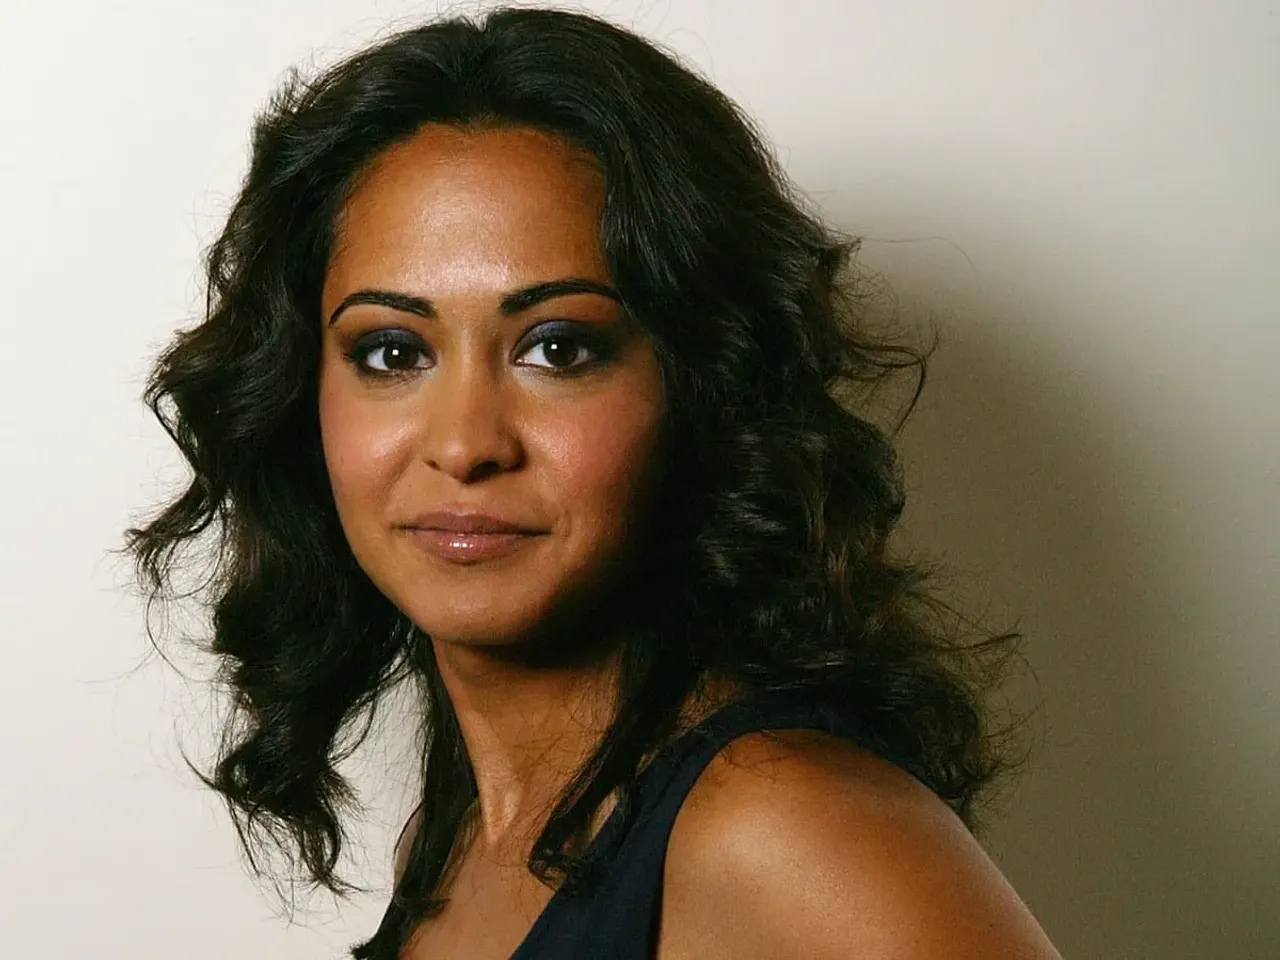 Parminder Nagra, Grappling With Her Indian Identity In Hollywood